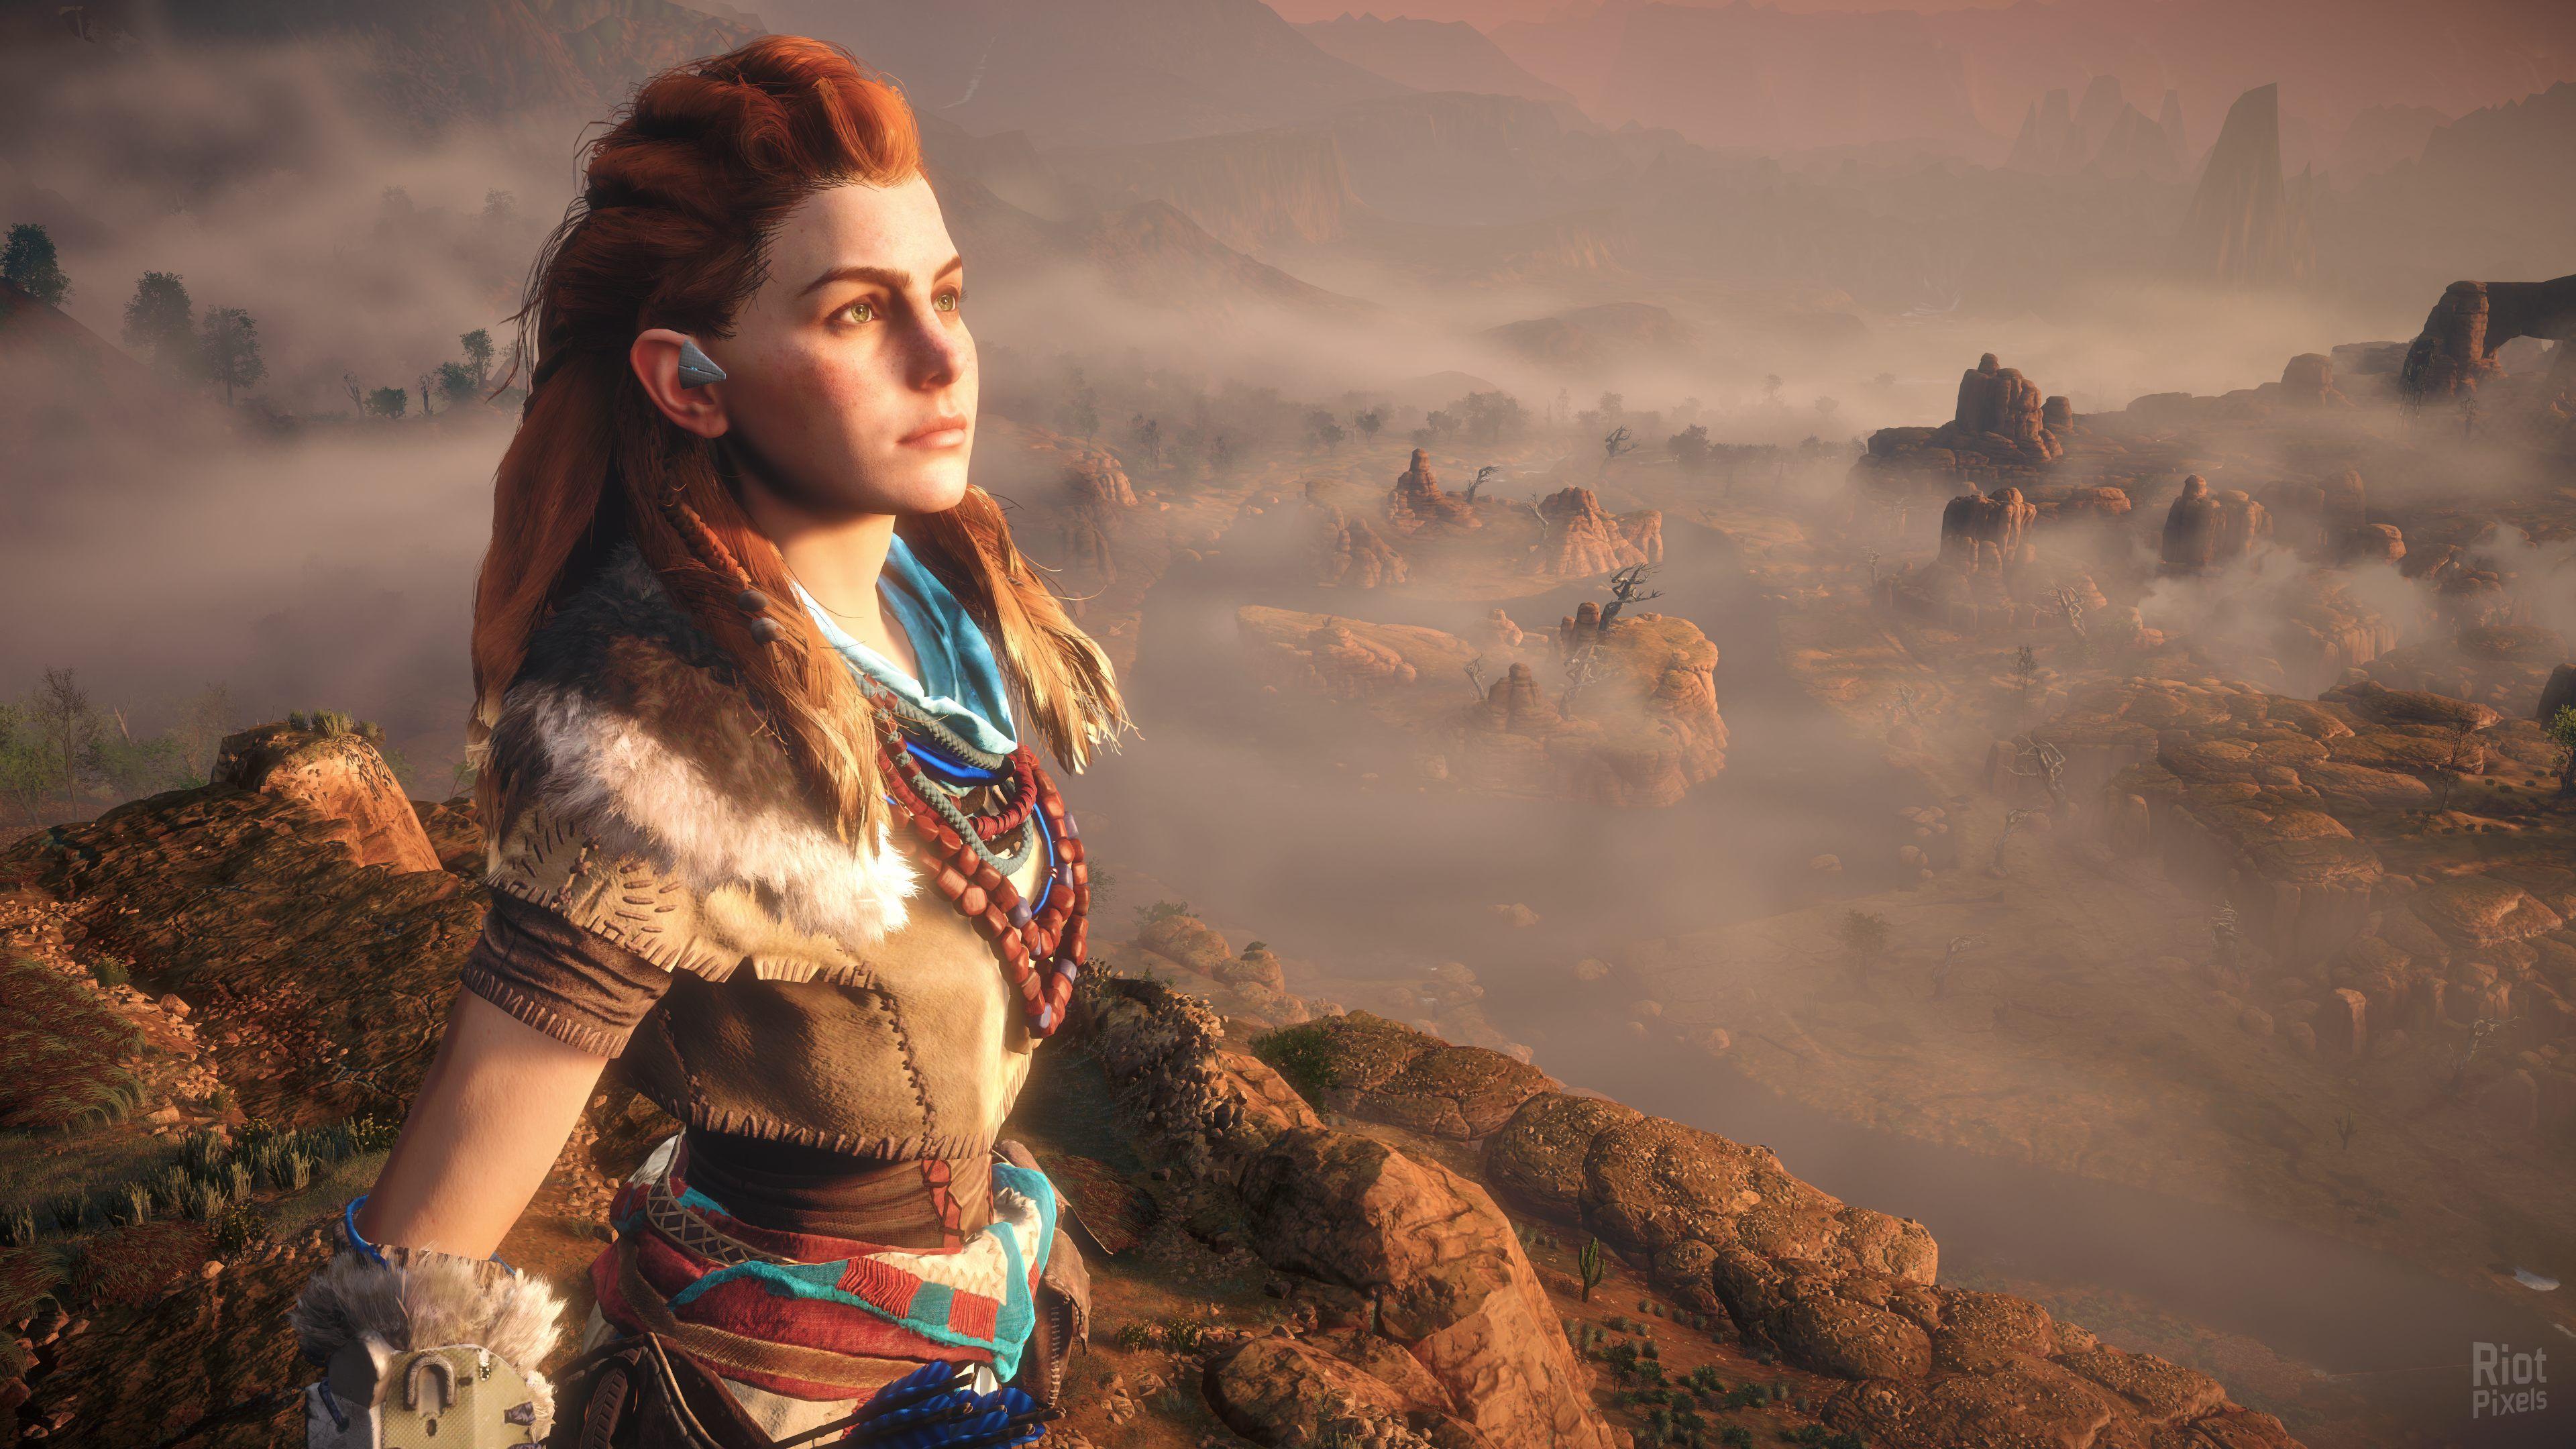 Wallpaper Aloy, Horizon Zero Dawn, Female protagonist, 4K, Games,. Wallpaper for iPhone, Android, Mobile and Desktop